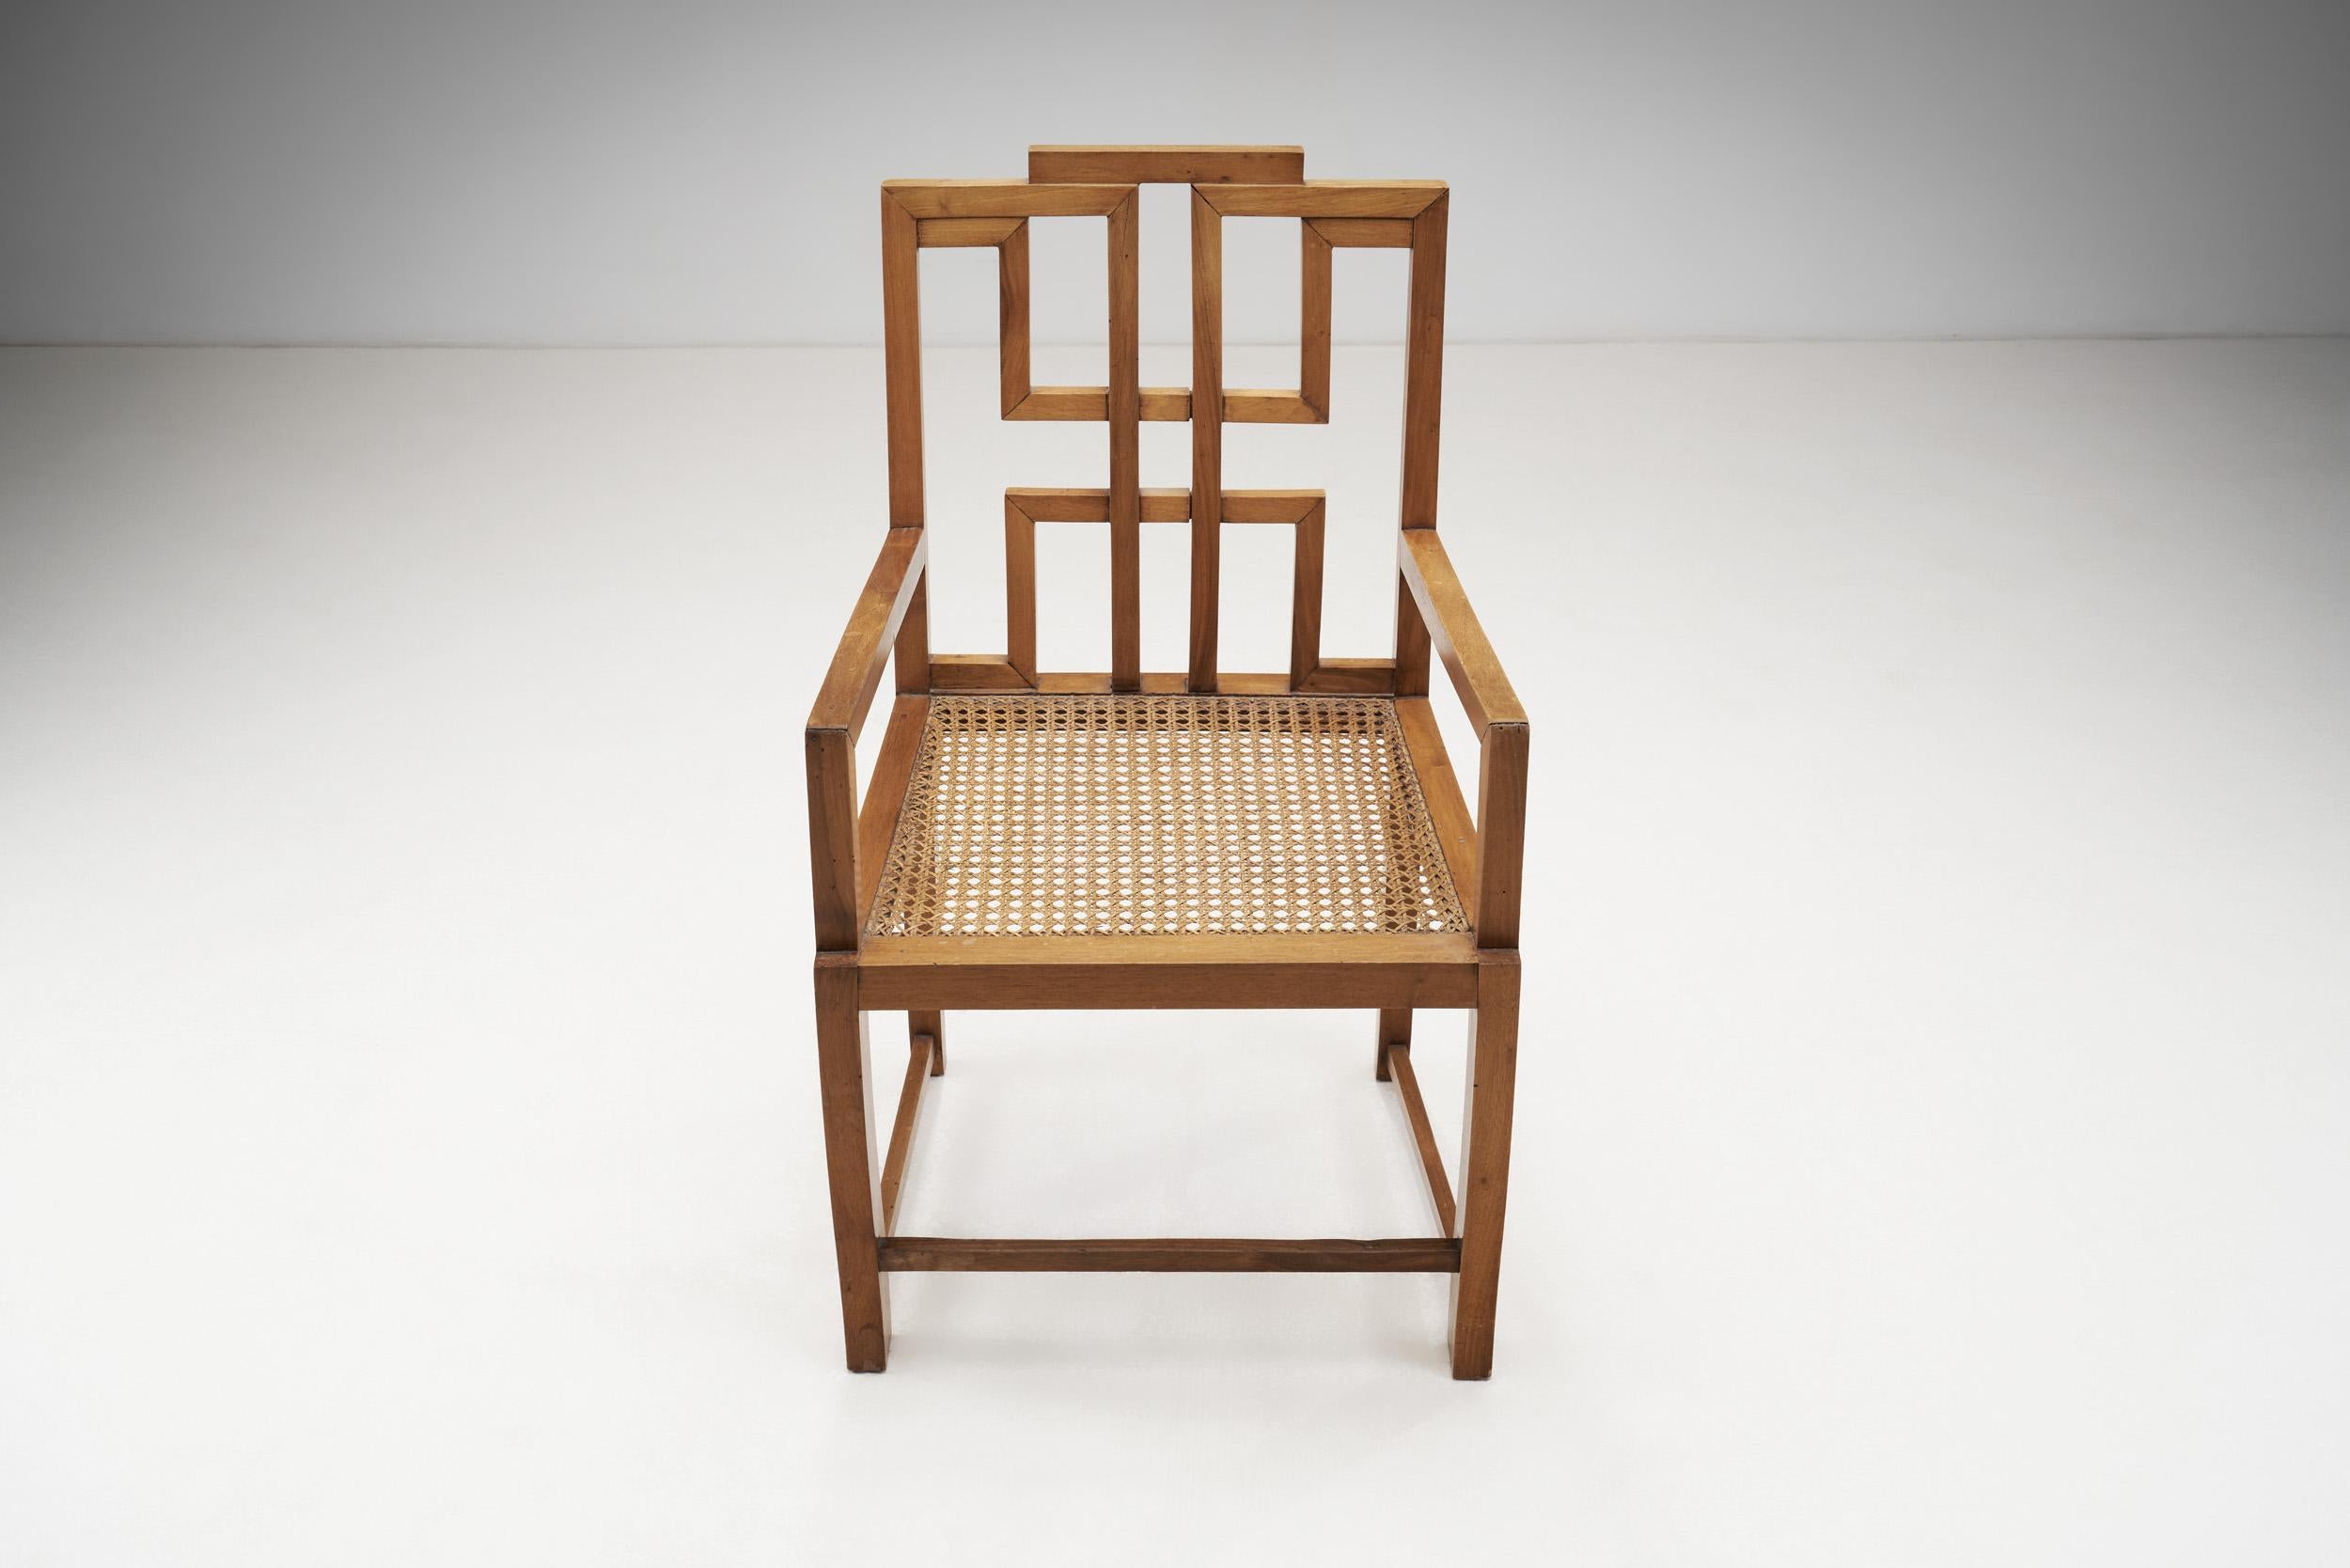 Wood Late 20th Century Anglo-Chinese Chairs with Caned Seats, Europe 1980s For Sale